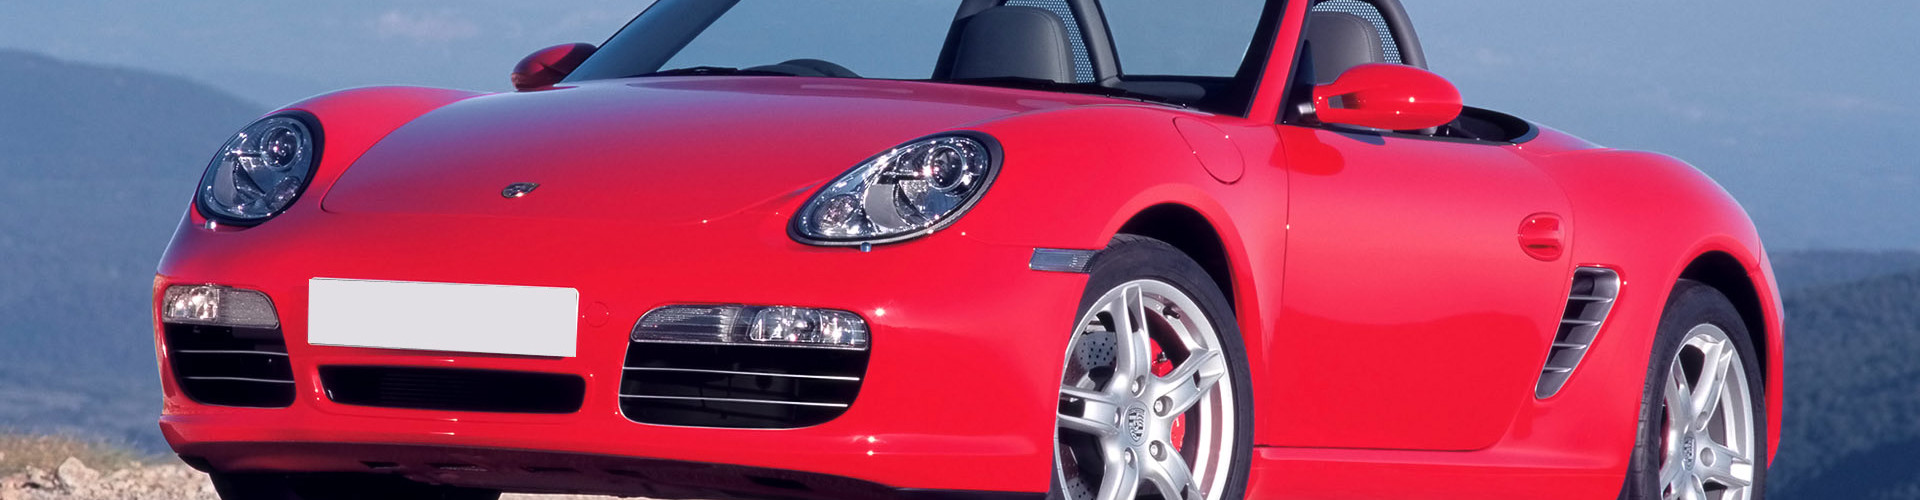 Used Porsche Boxster Buying Guide